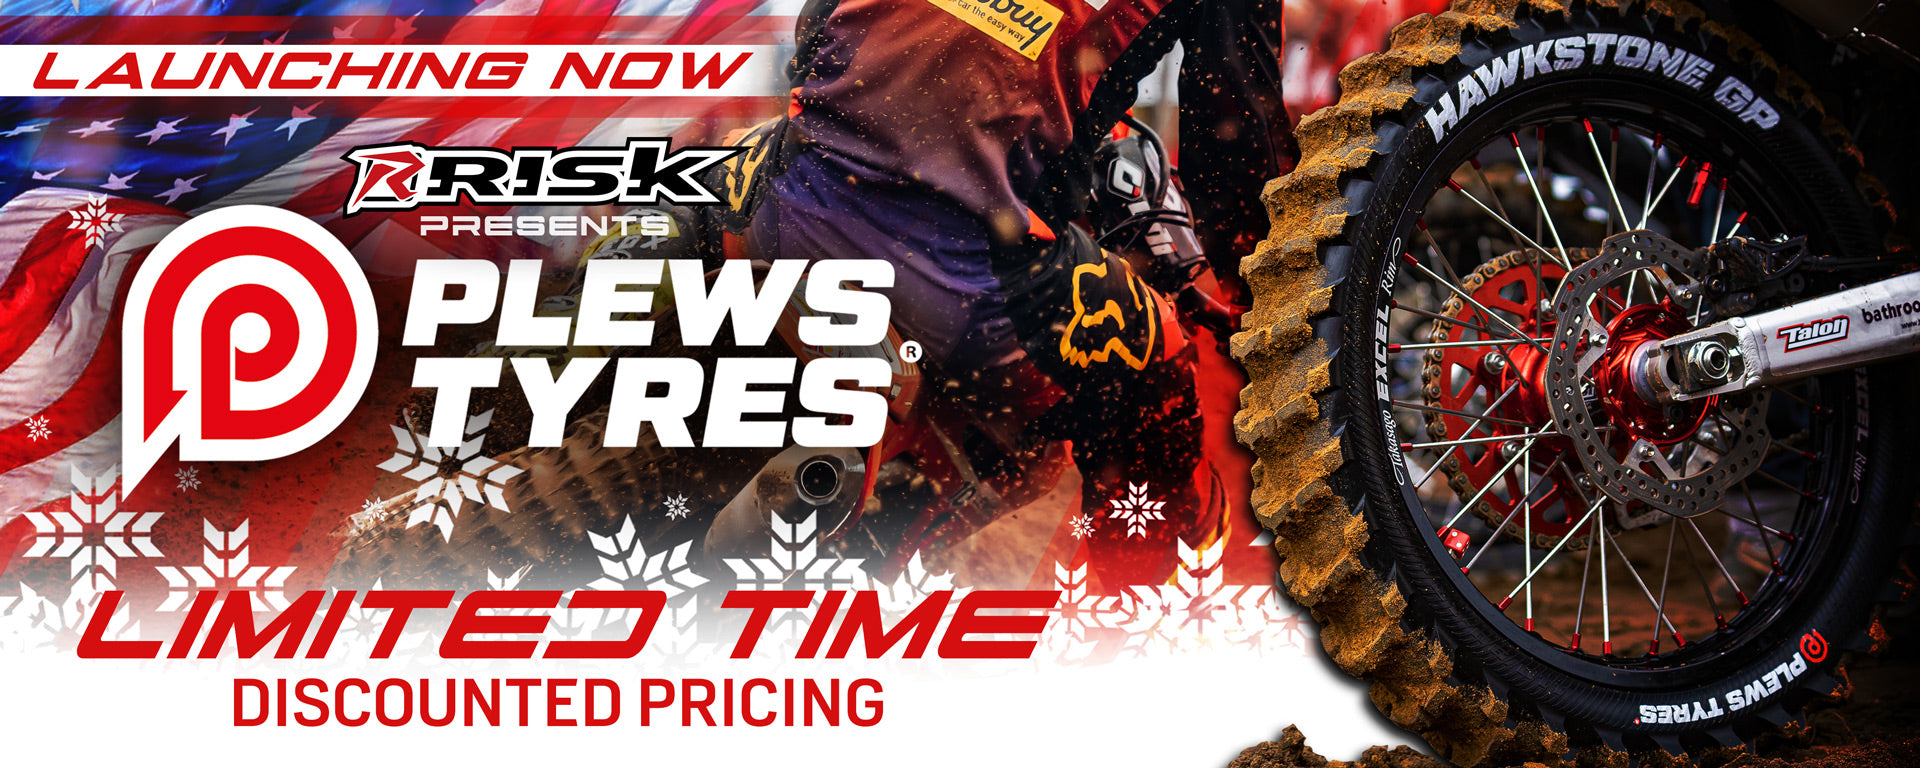 Plews Tyres Web banner featuring 'limited time - discount pricing' verbage. risk presents plews tyres. launching now. usa flag and two lifestyle dirt bike images in the background.